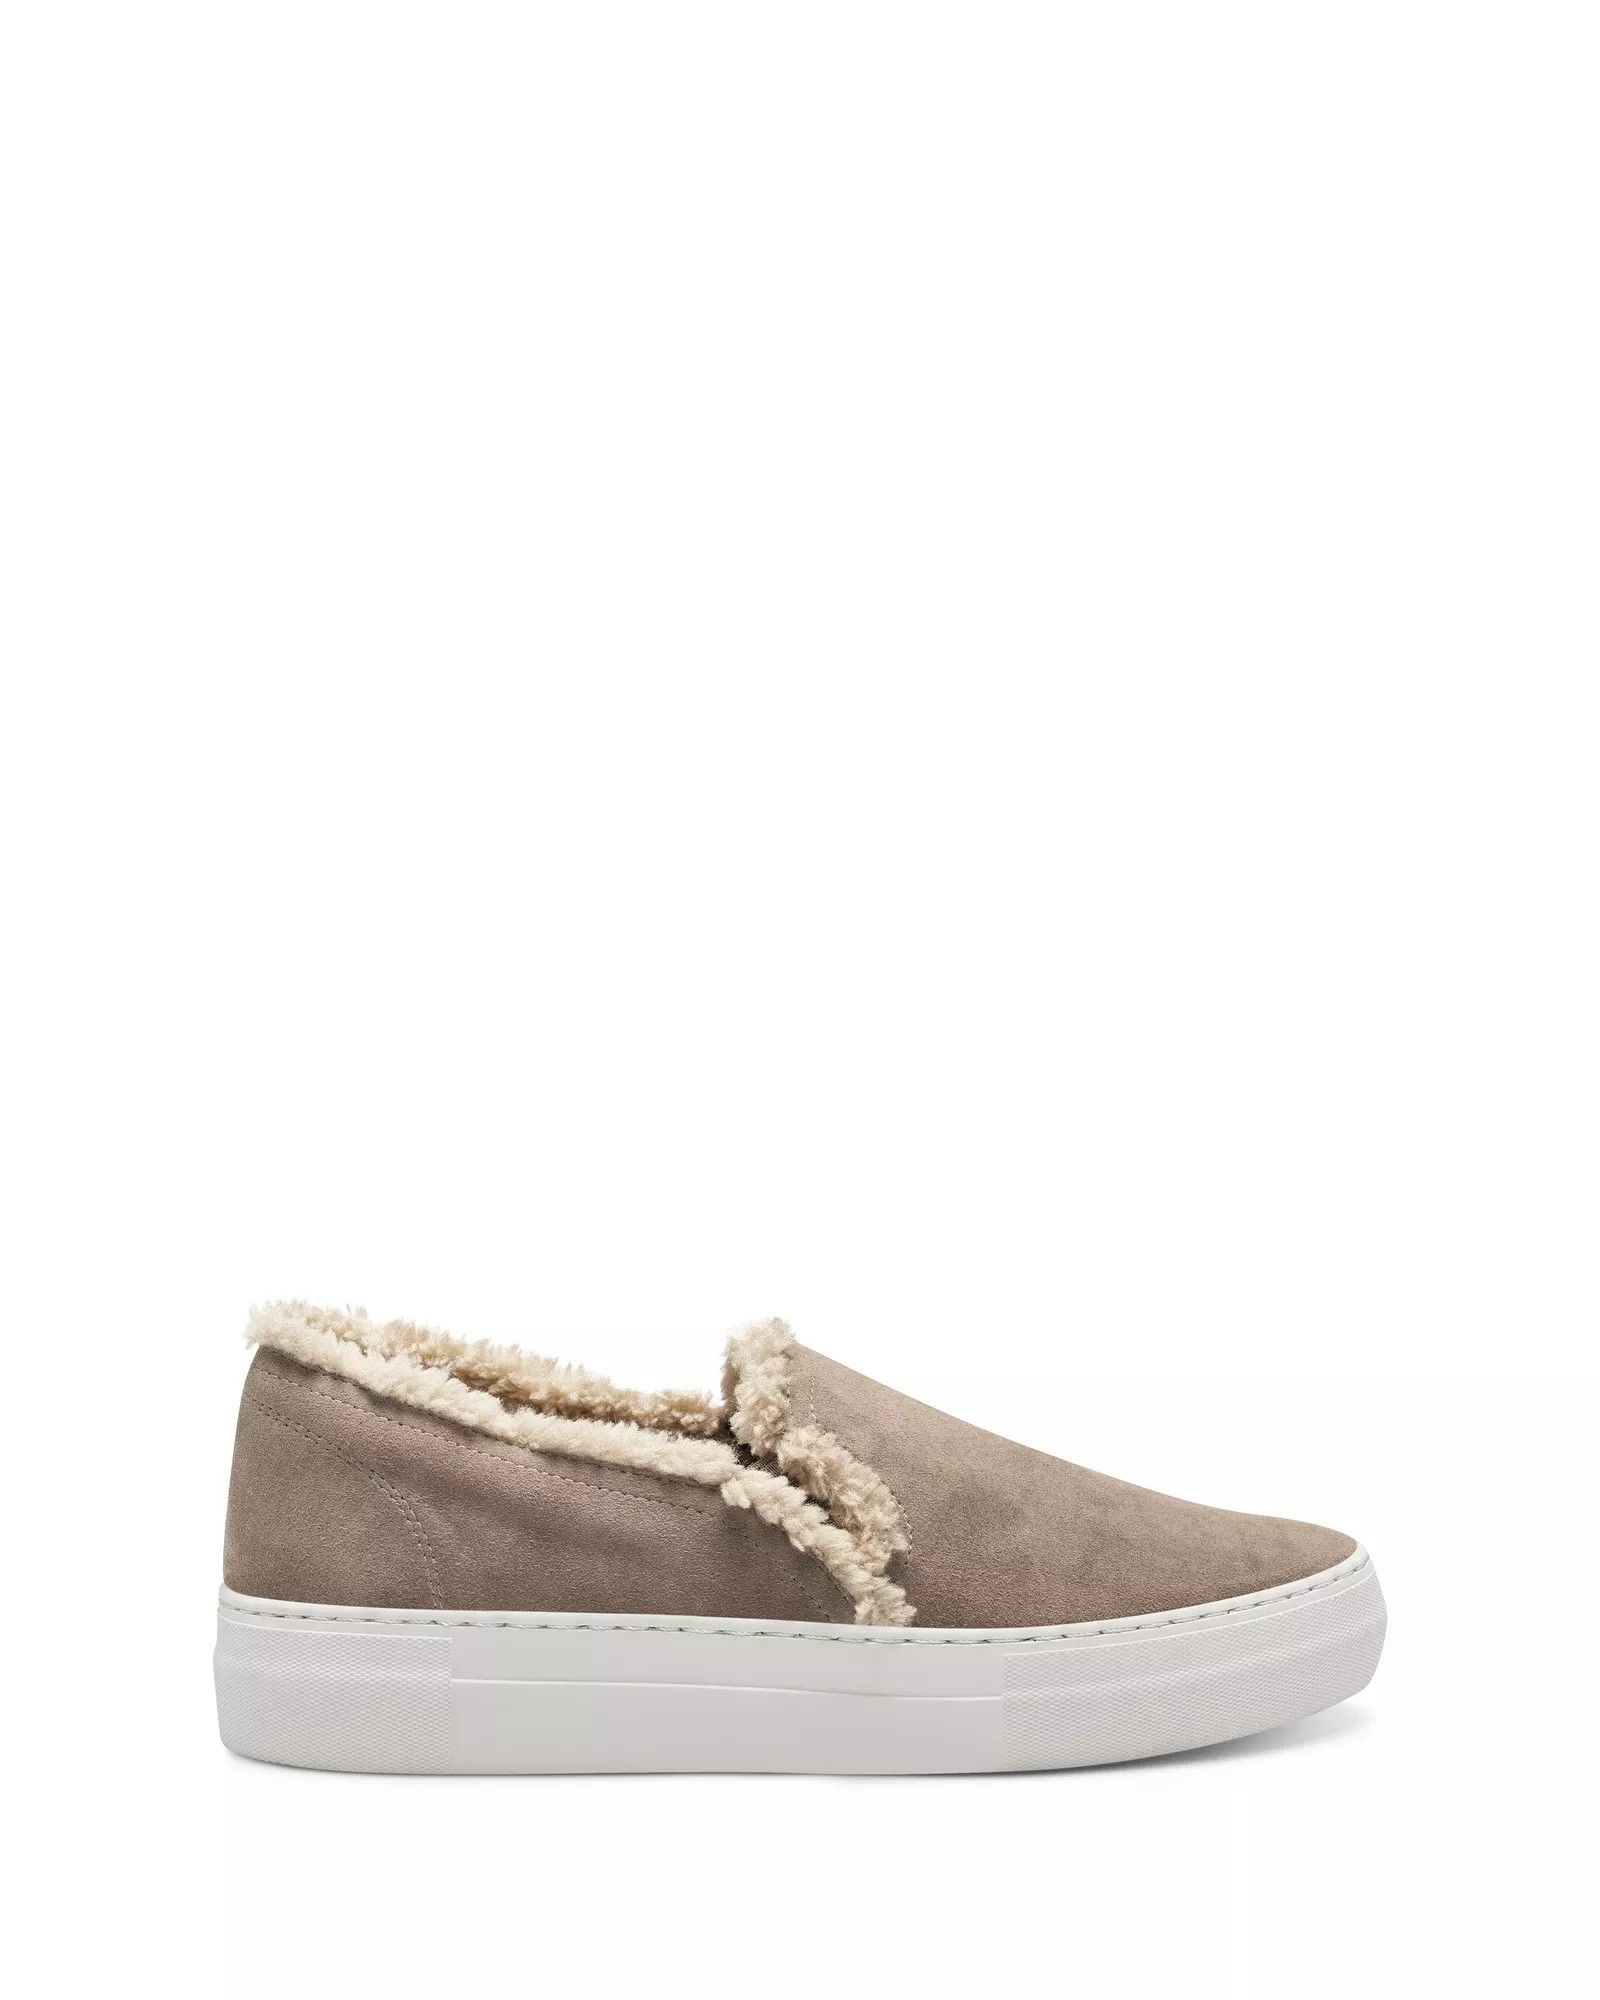 Katerinda Slip-On Sneaker - Excluded from Promotions | Vince Camuto